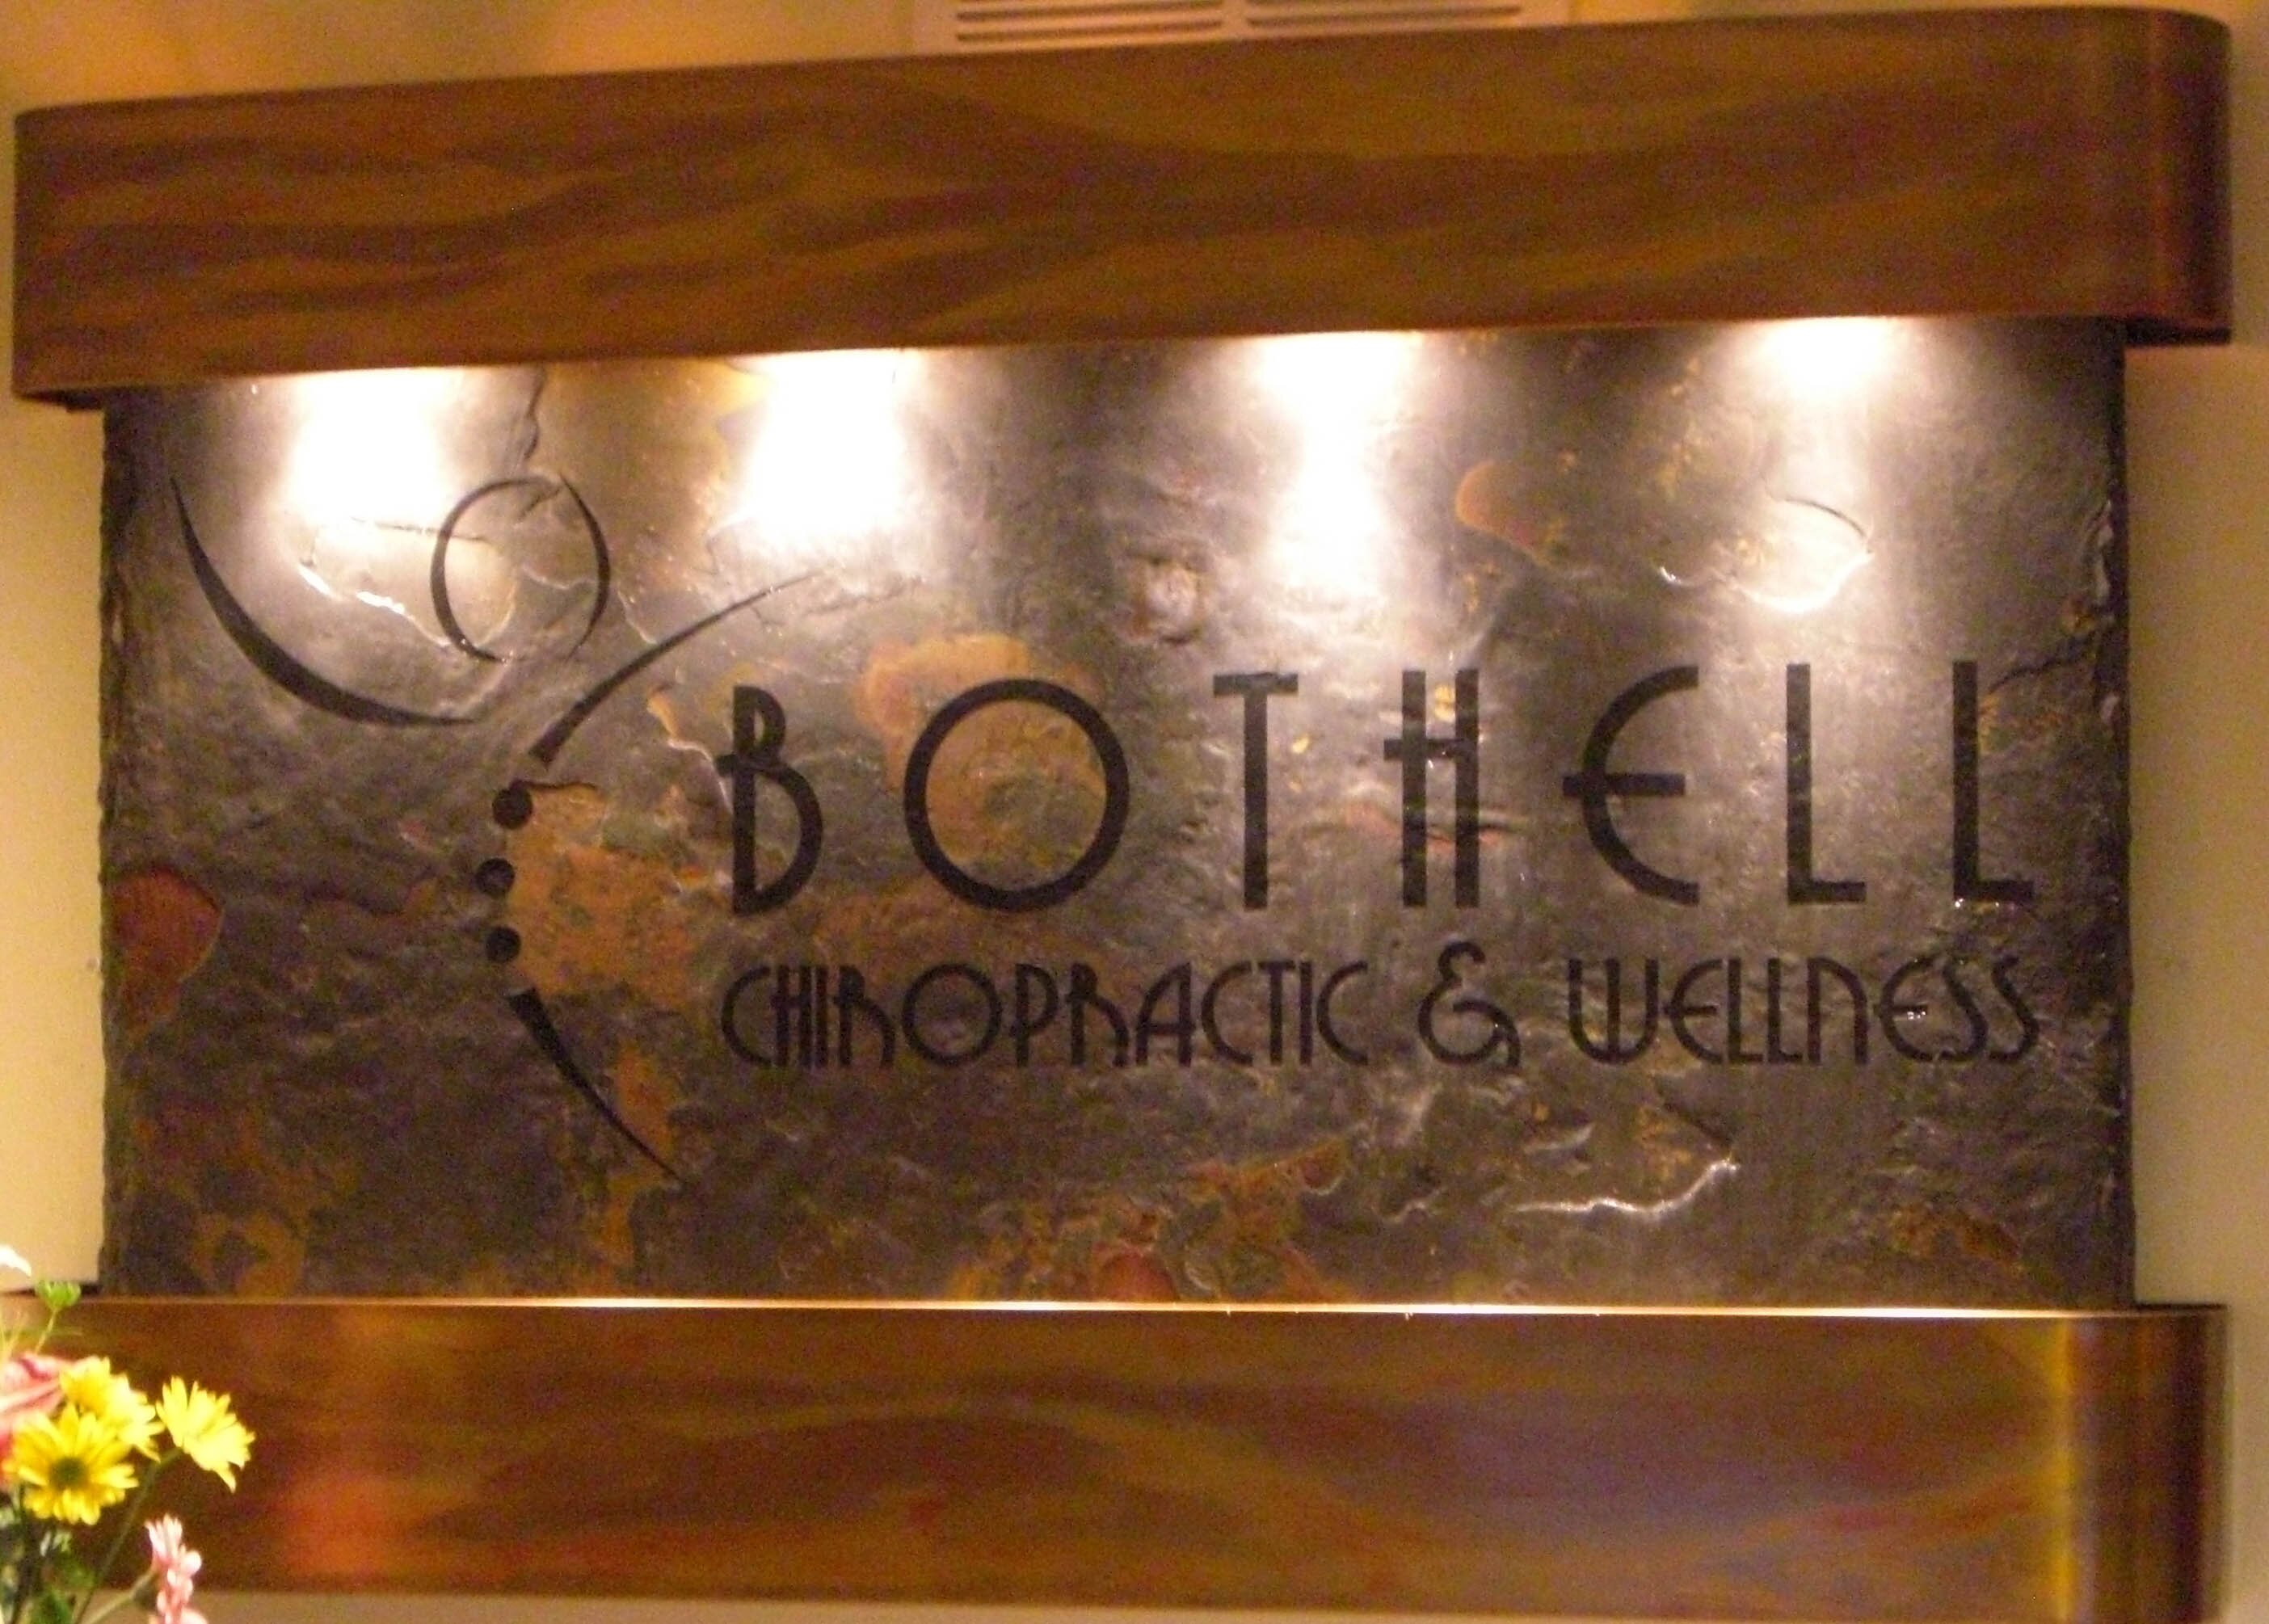 Bothell's premiere wellness center for chiropractic care and massage.